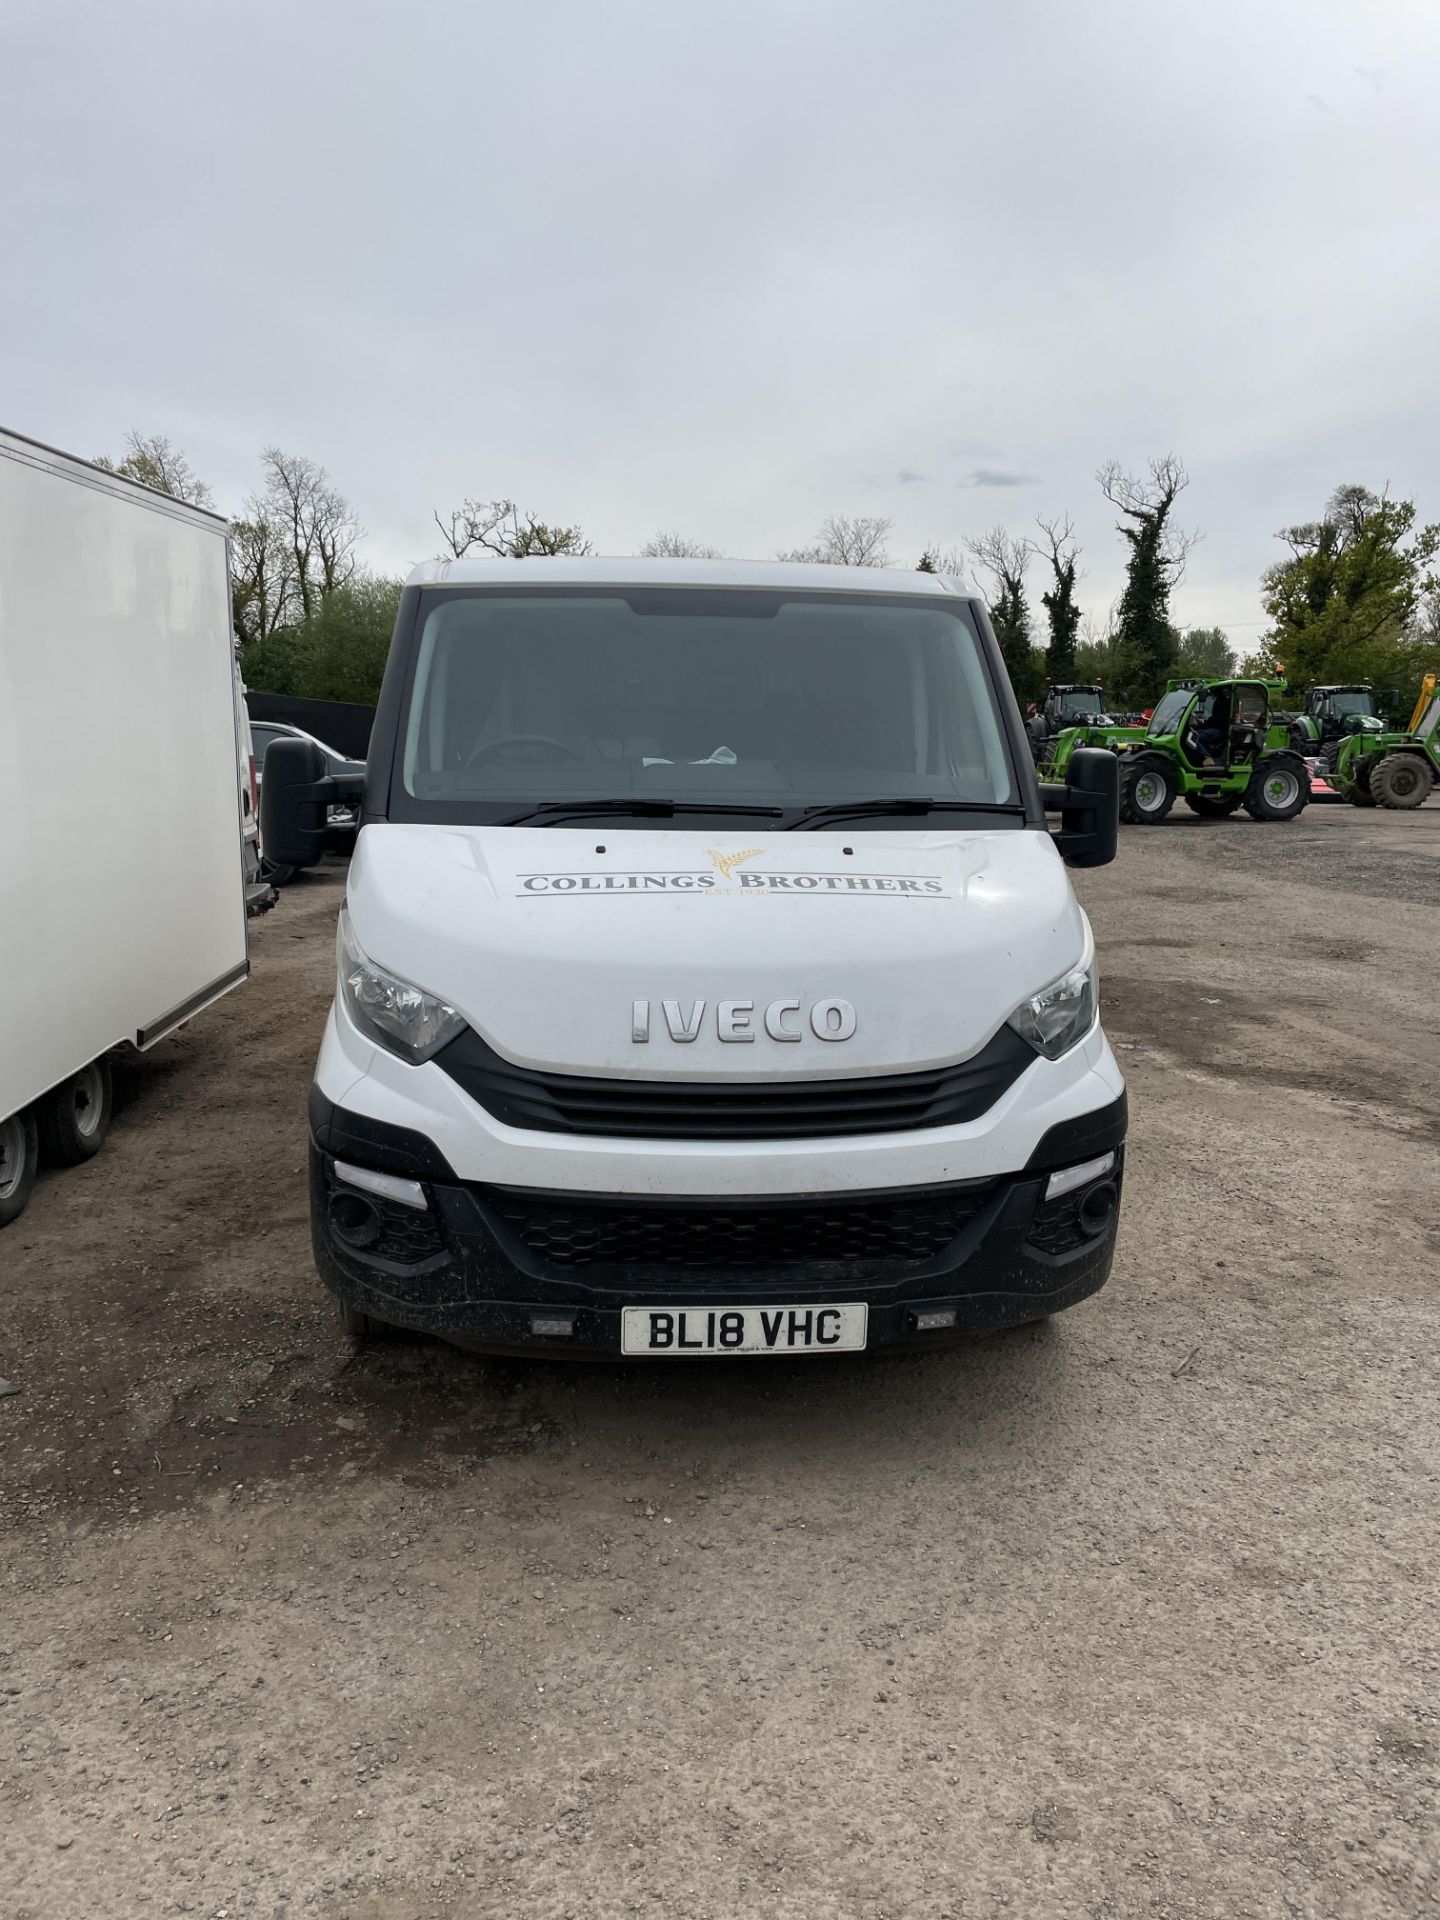 1: Iveco Daily 35-120 (3000) 2.3D 35S12 Panel Van Registration No. BL18 VHC Date First Registered 13